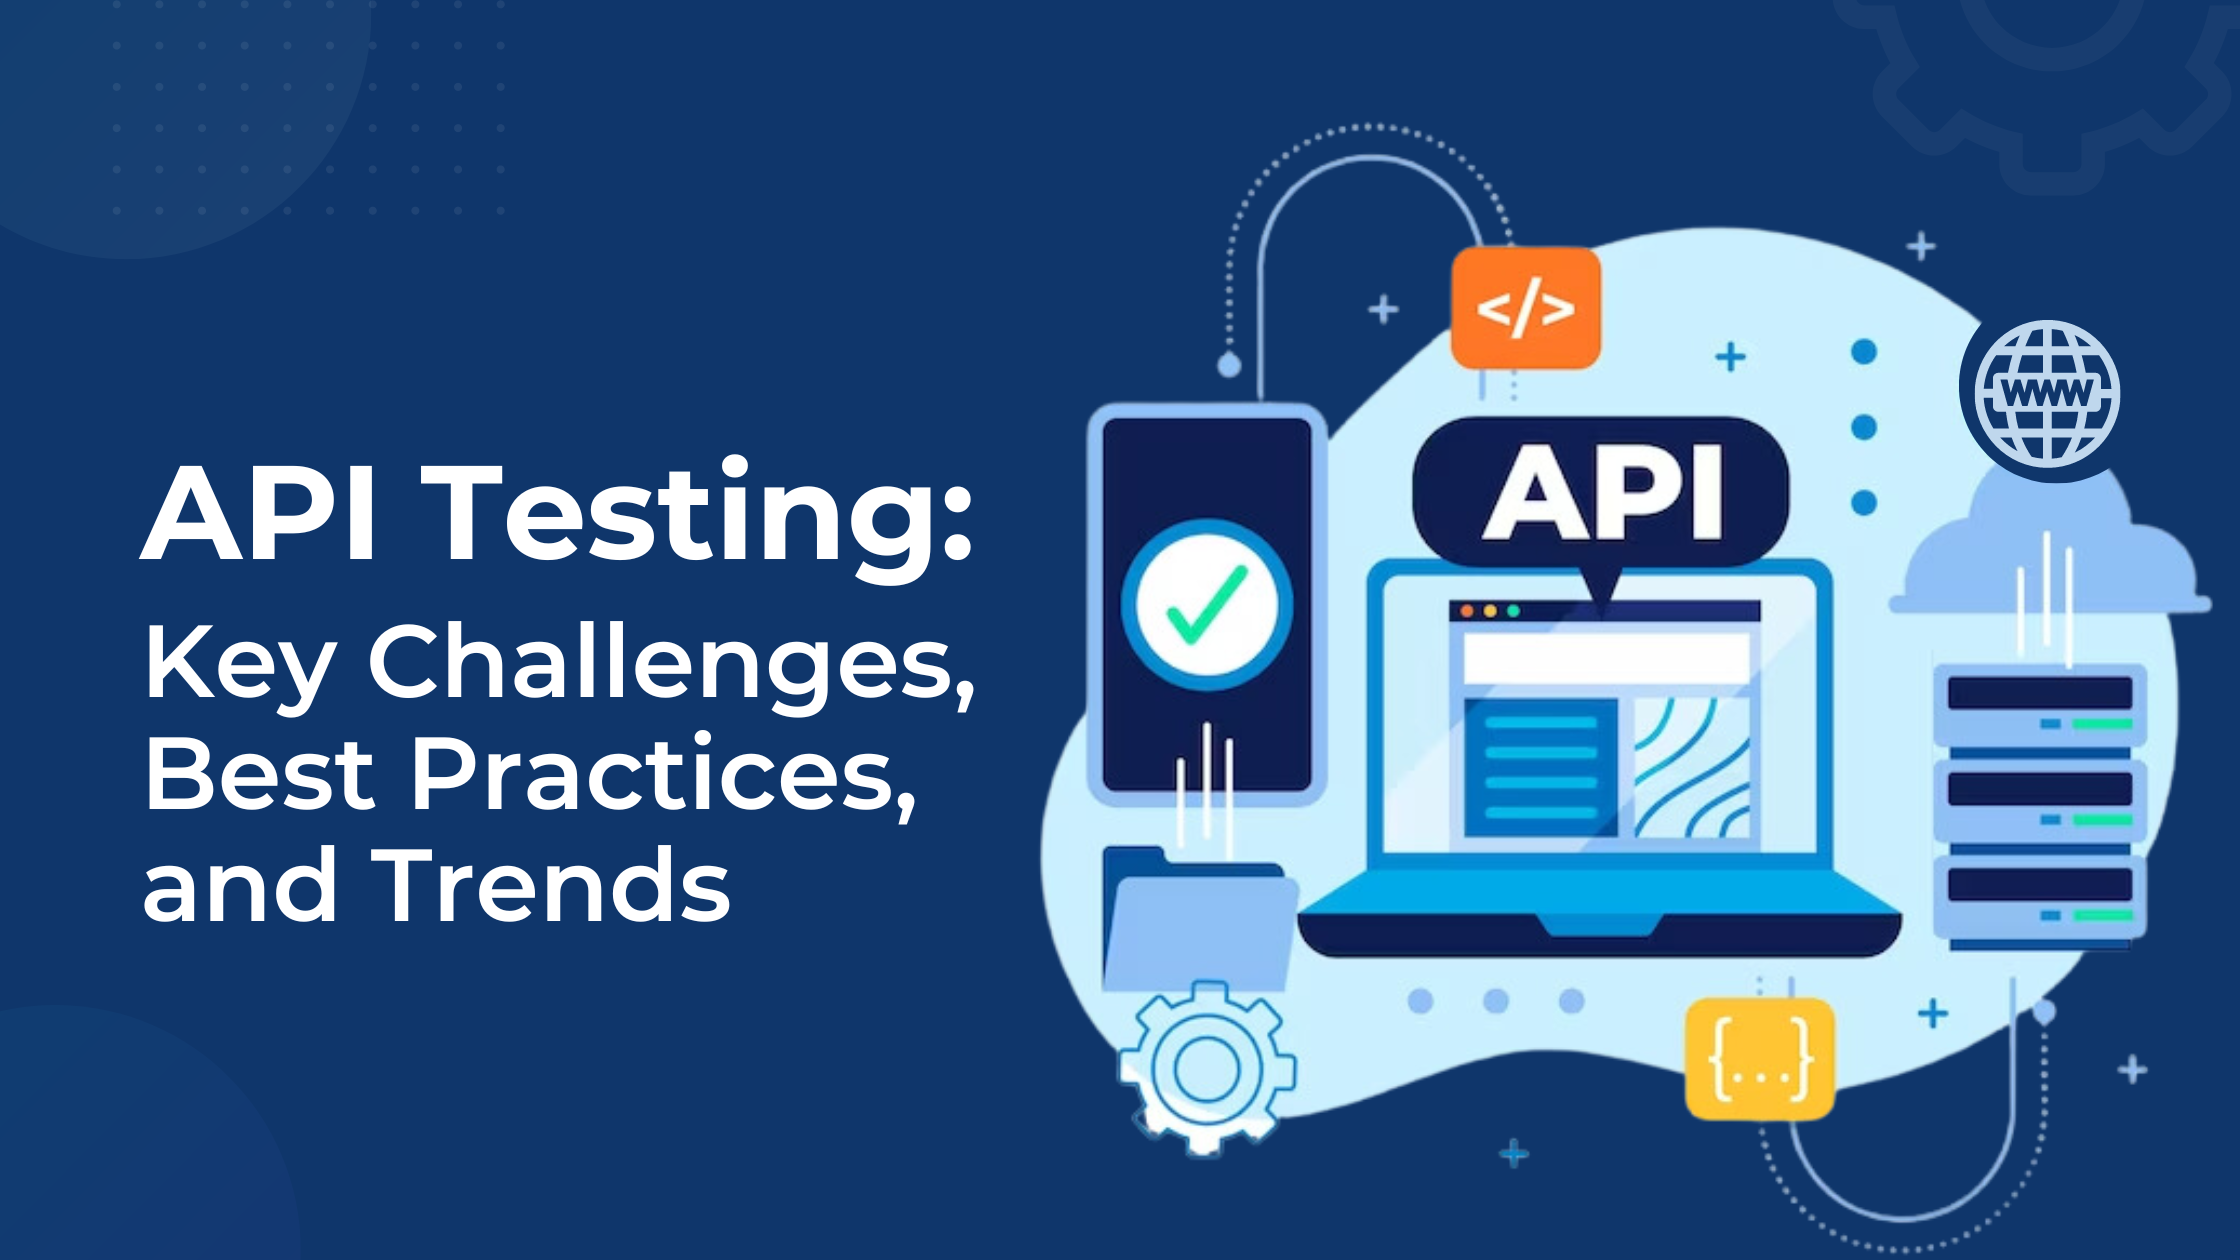 The graphic features a blend of icons representing APIs, testing tools, and trend graphs, conveying the comprehensive content on challenges, best practices, and evolving trends in API testing within the document.